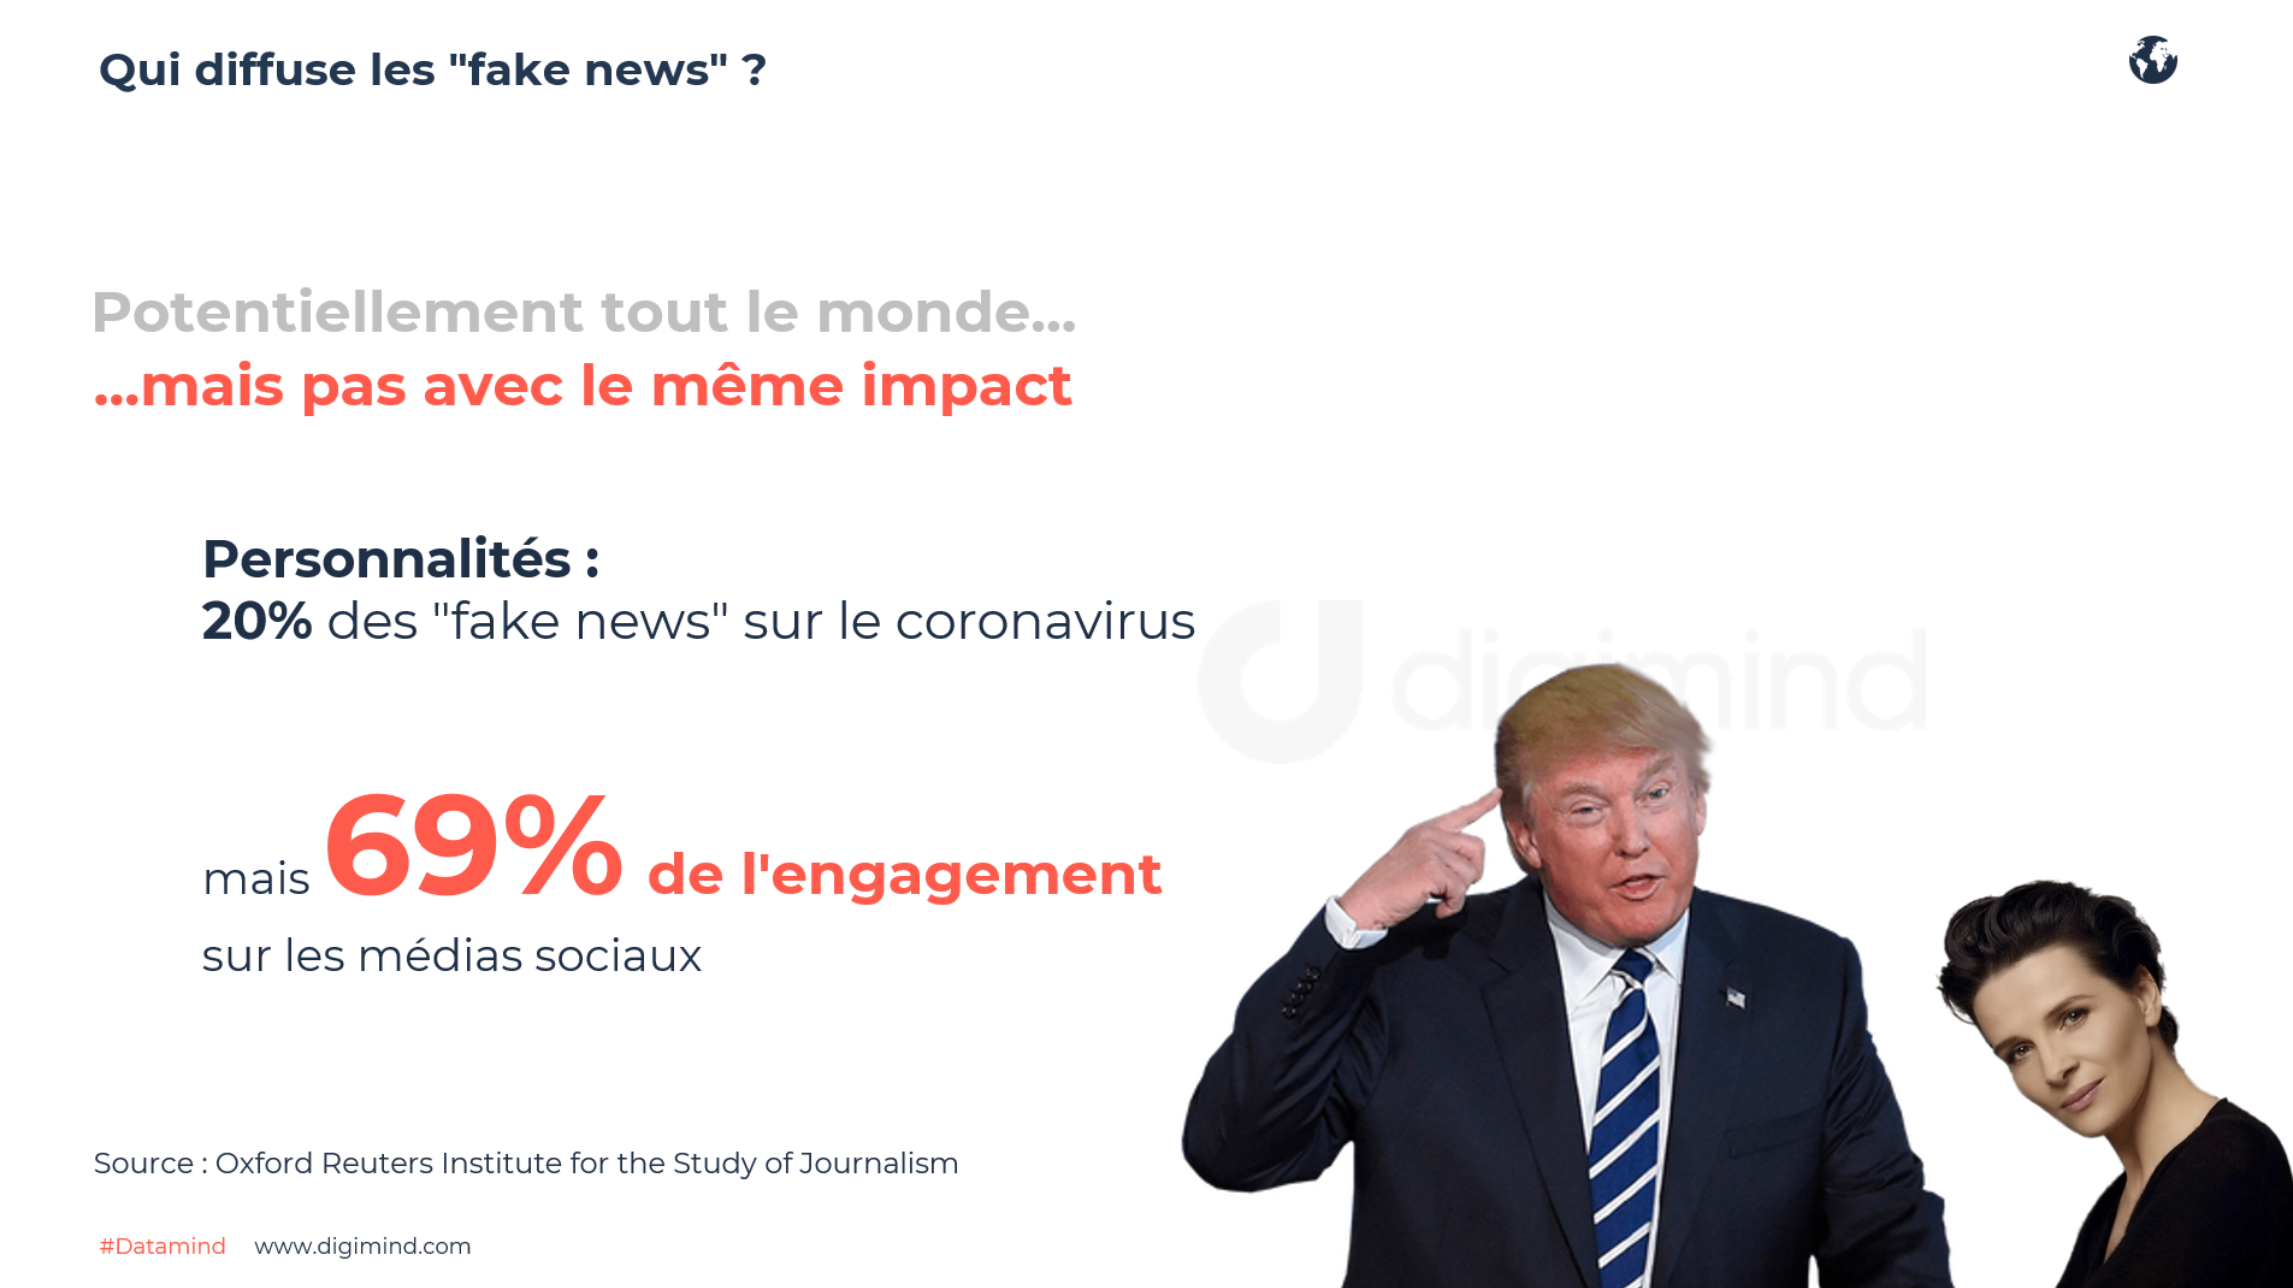 ui diffuse les "fake news" ? Oxford Reuters Institute for the Study of Journalism